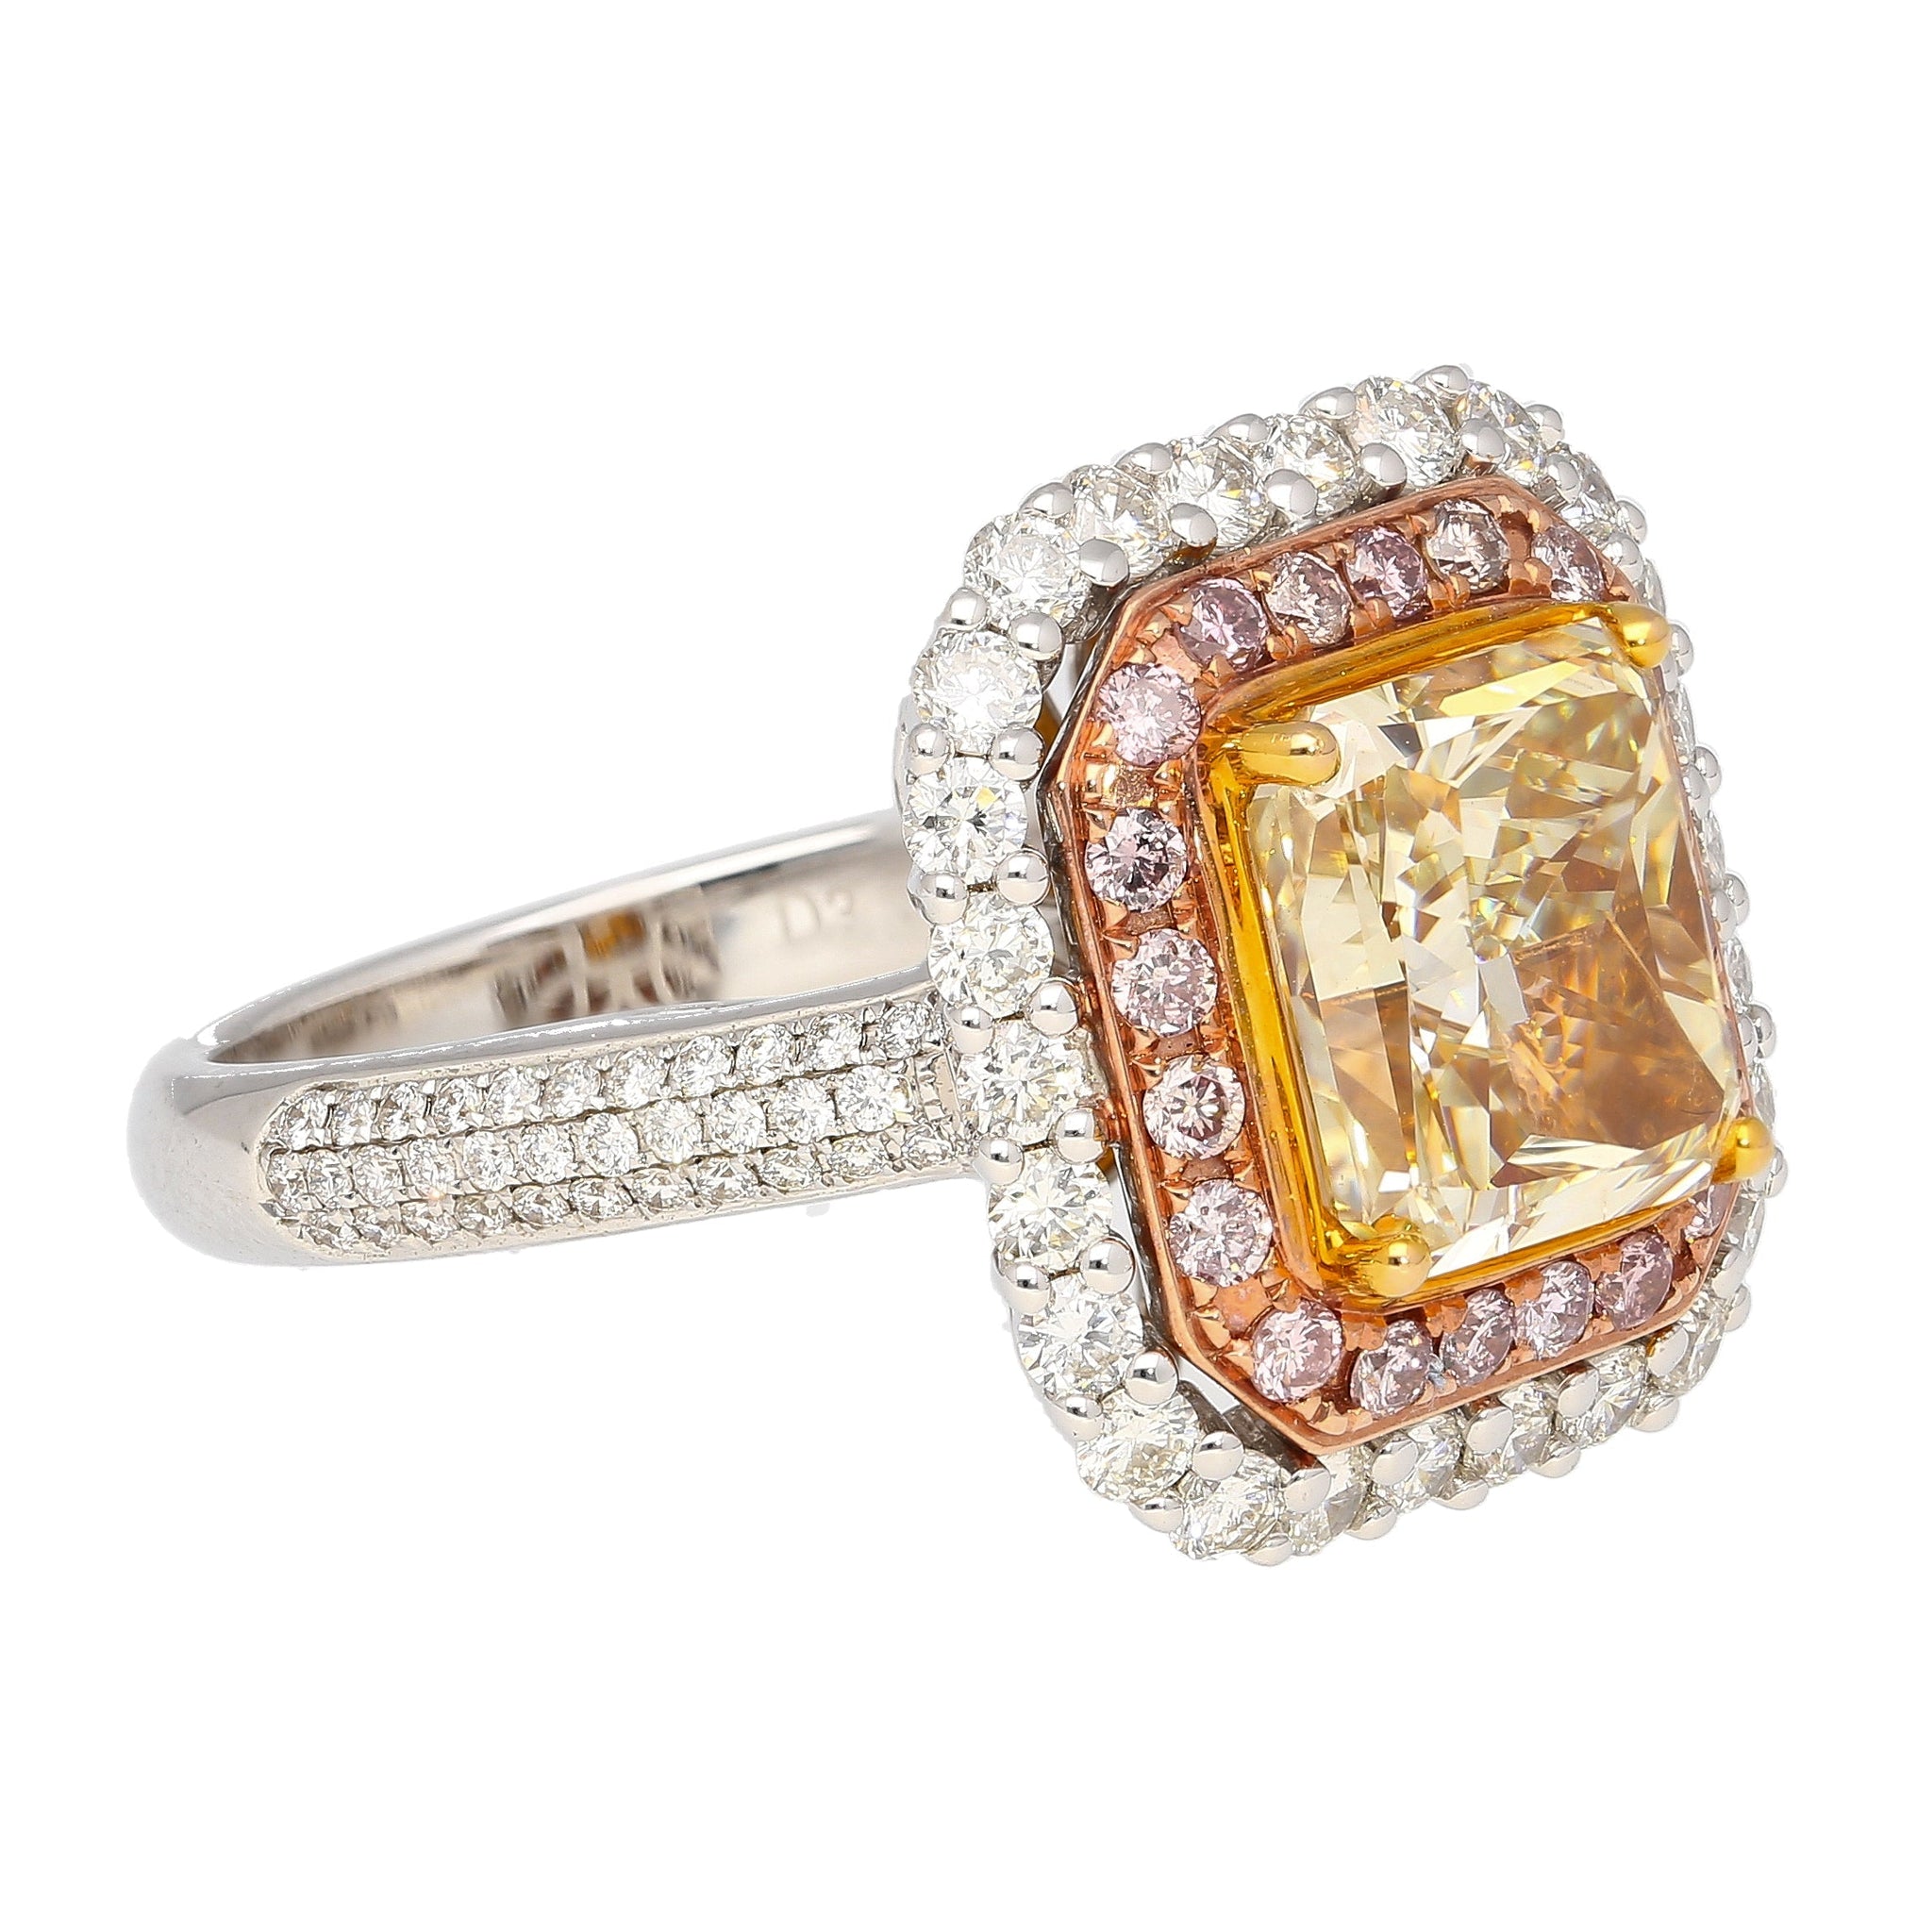 GIA Certified 3.51 Carat Fancy Brownish Yellow Diamond Ring with Pink and White Diamond Halo